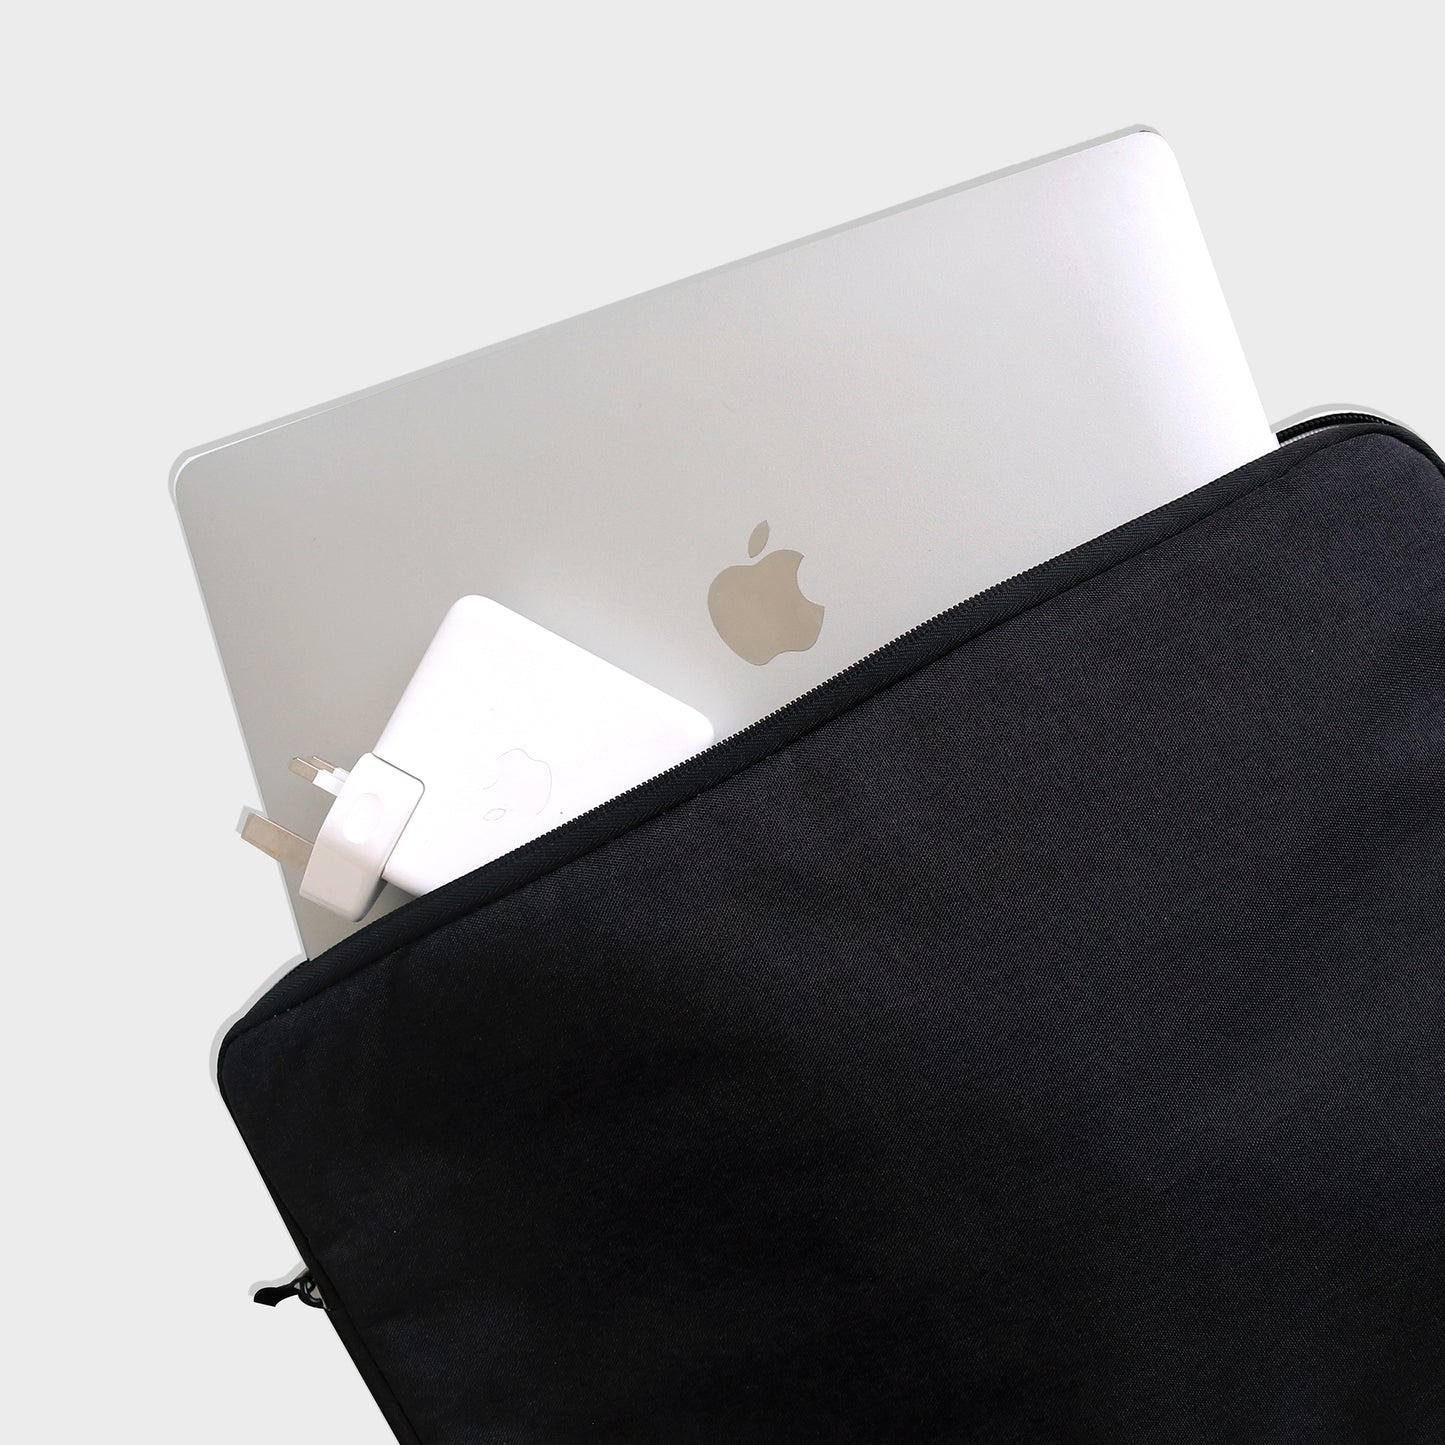 Universal Laptop Pouch - Perfect